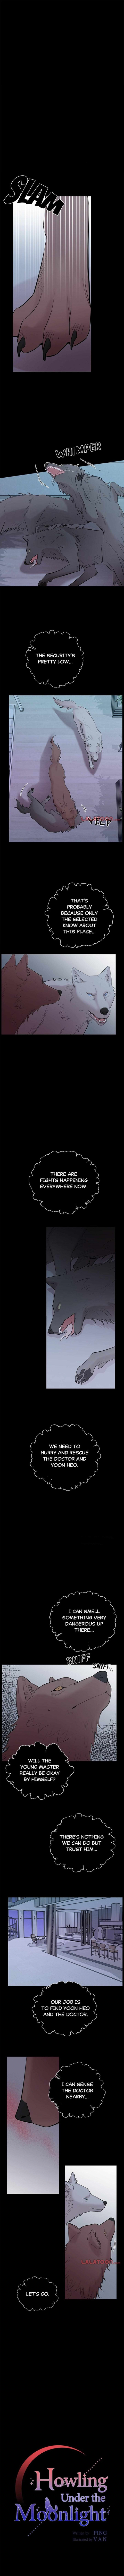 Moonlight Howling - Page 2